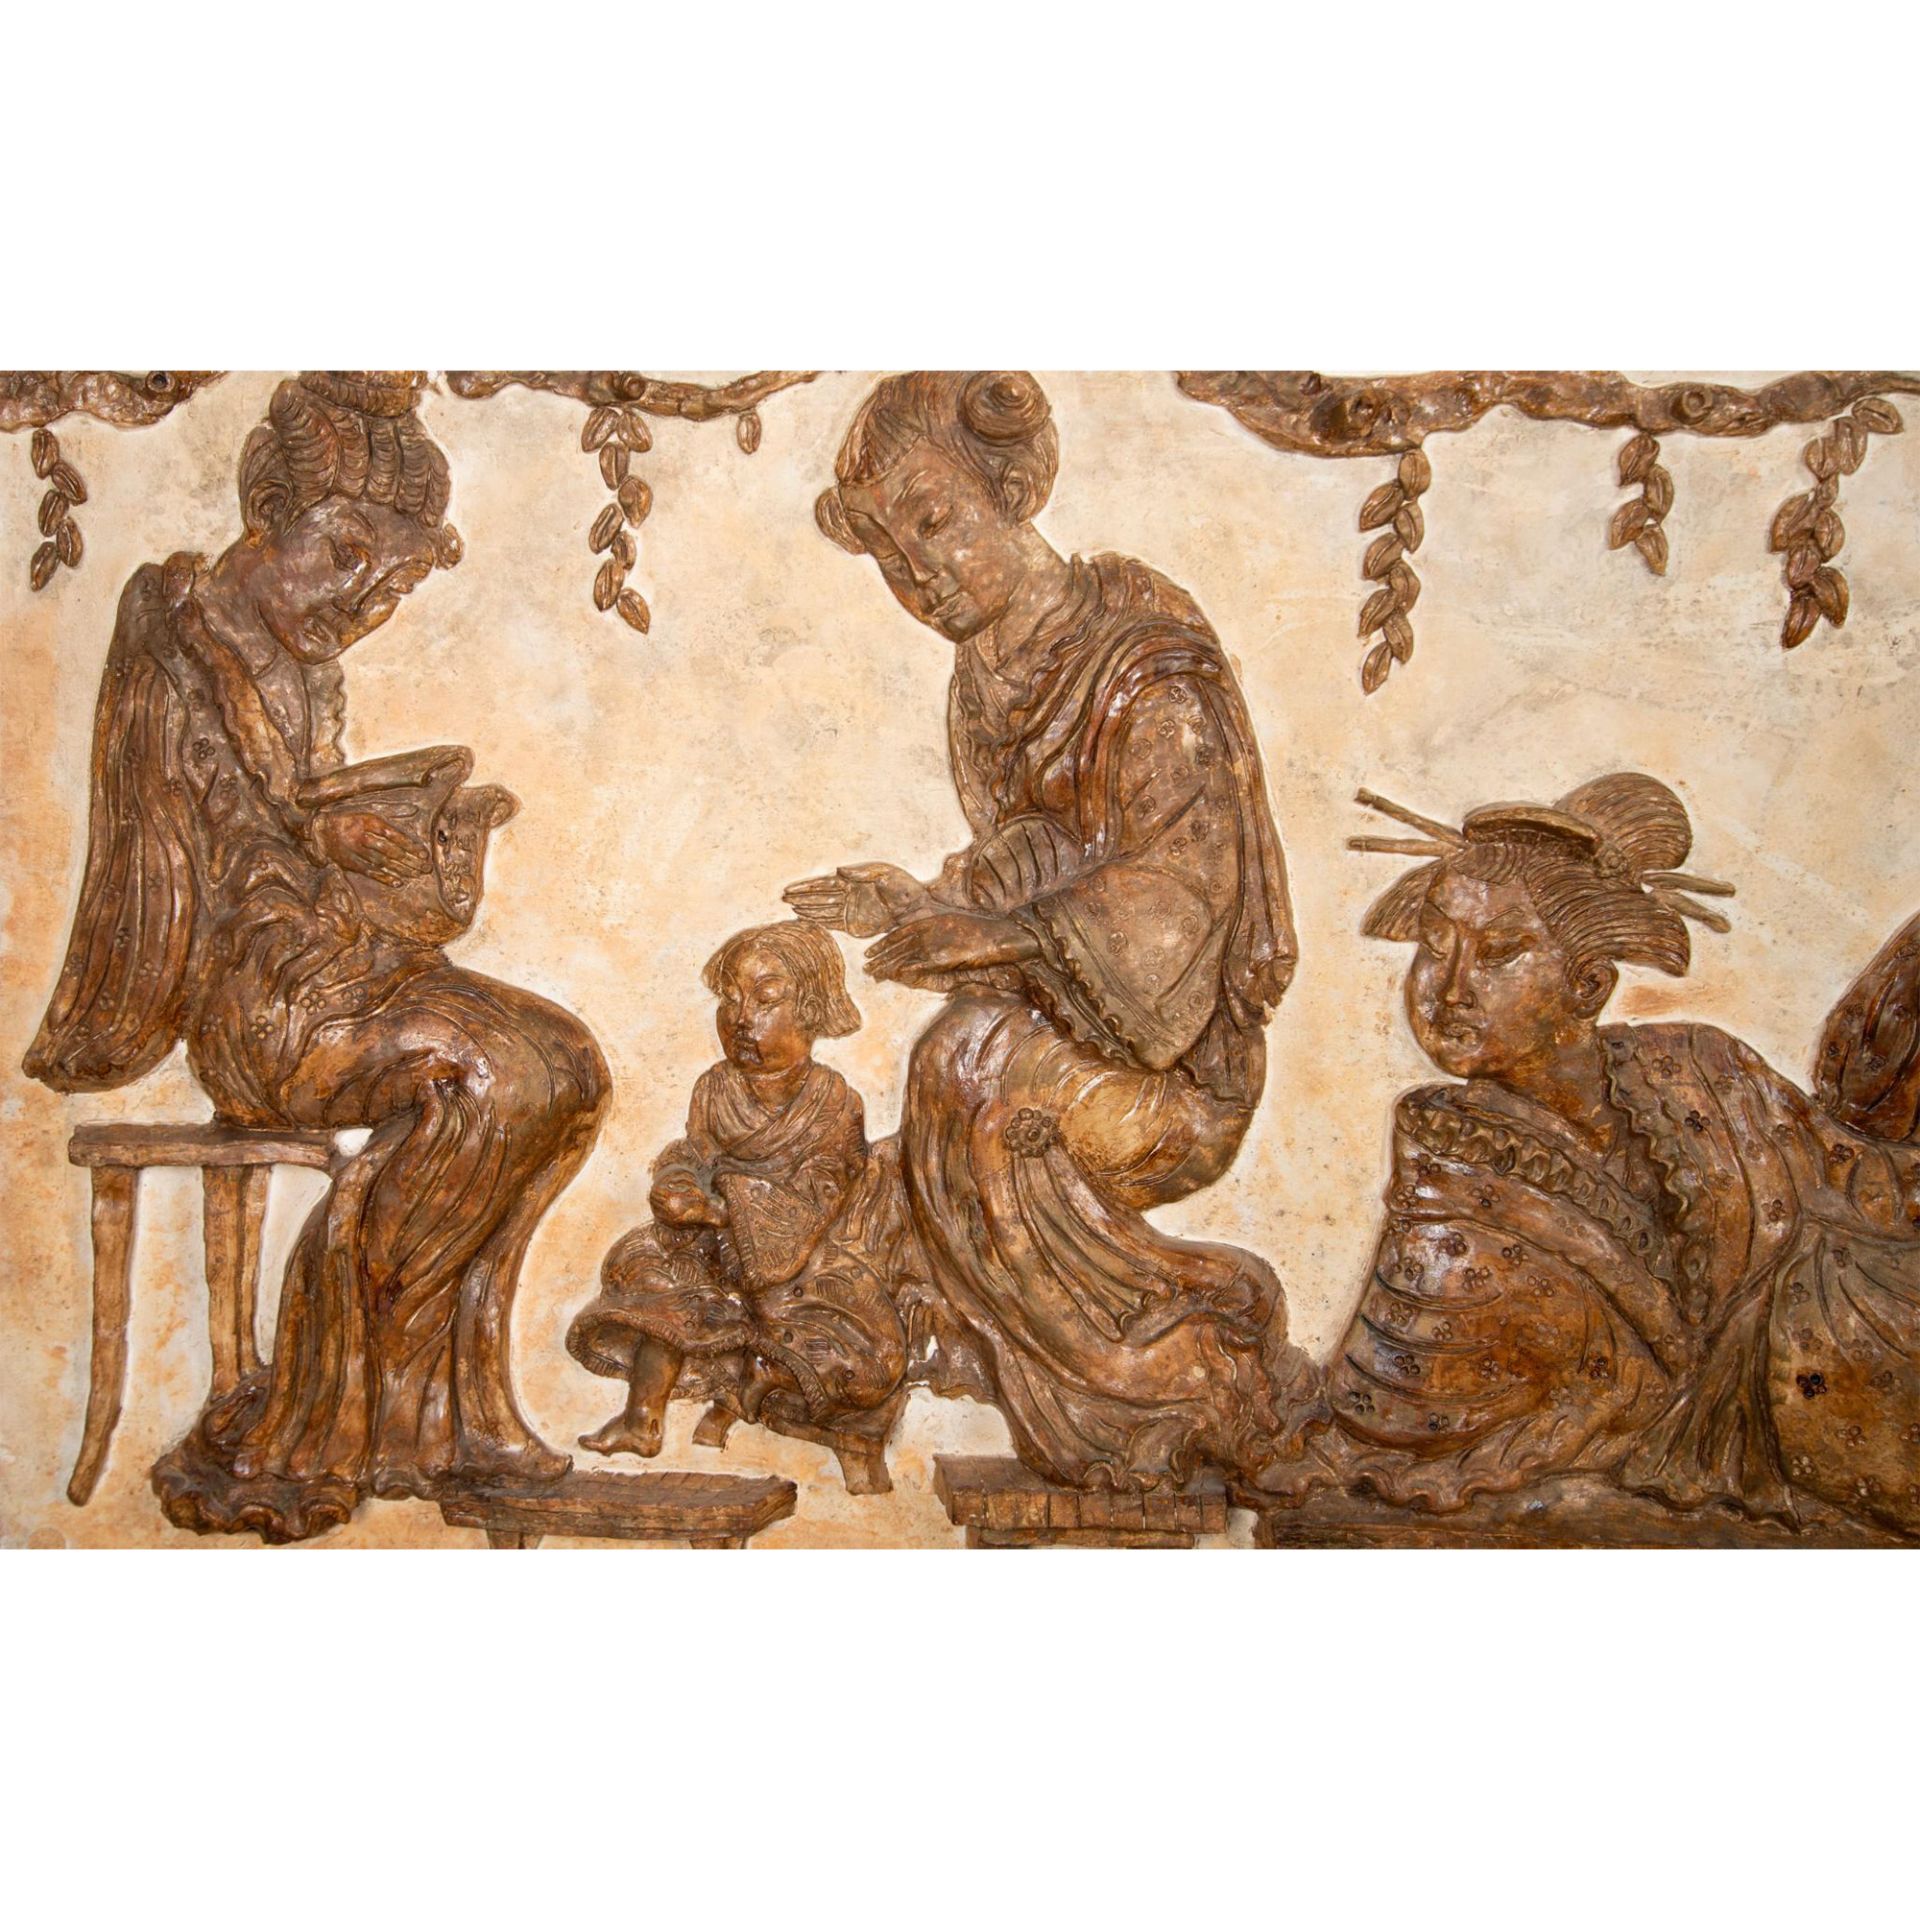 Gilded Plaster, Chinoiserie Figurative Composition - Image 2 of 7